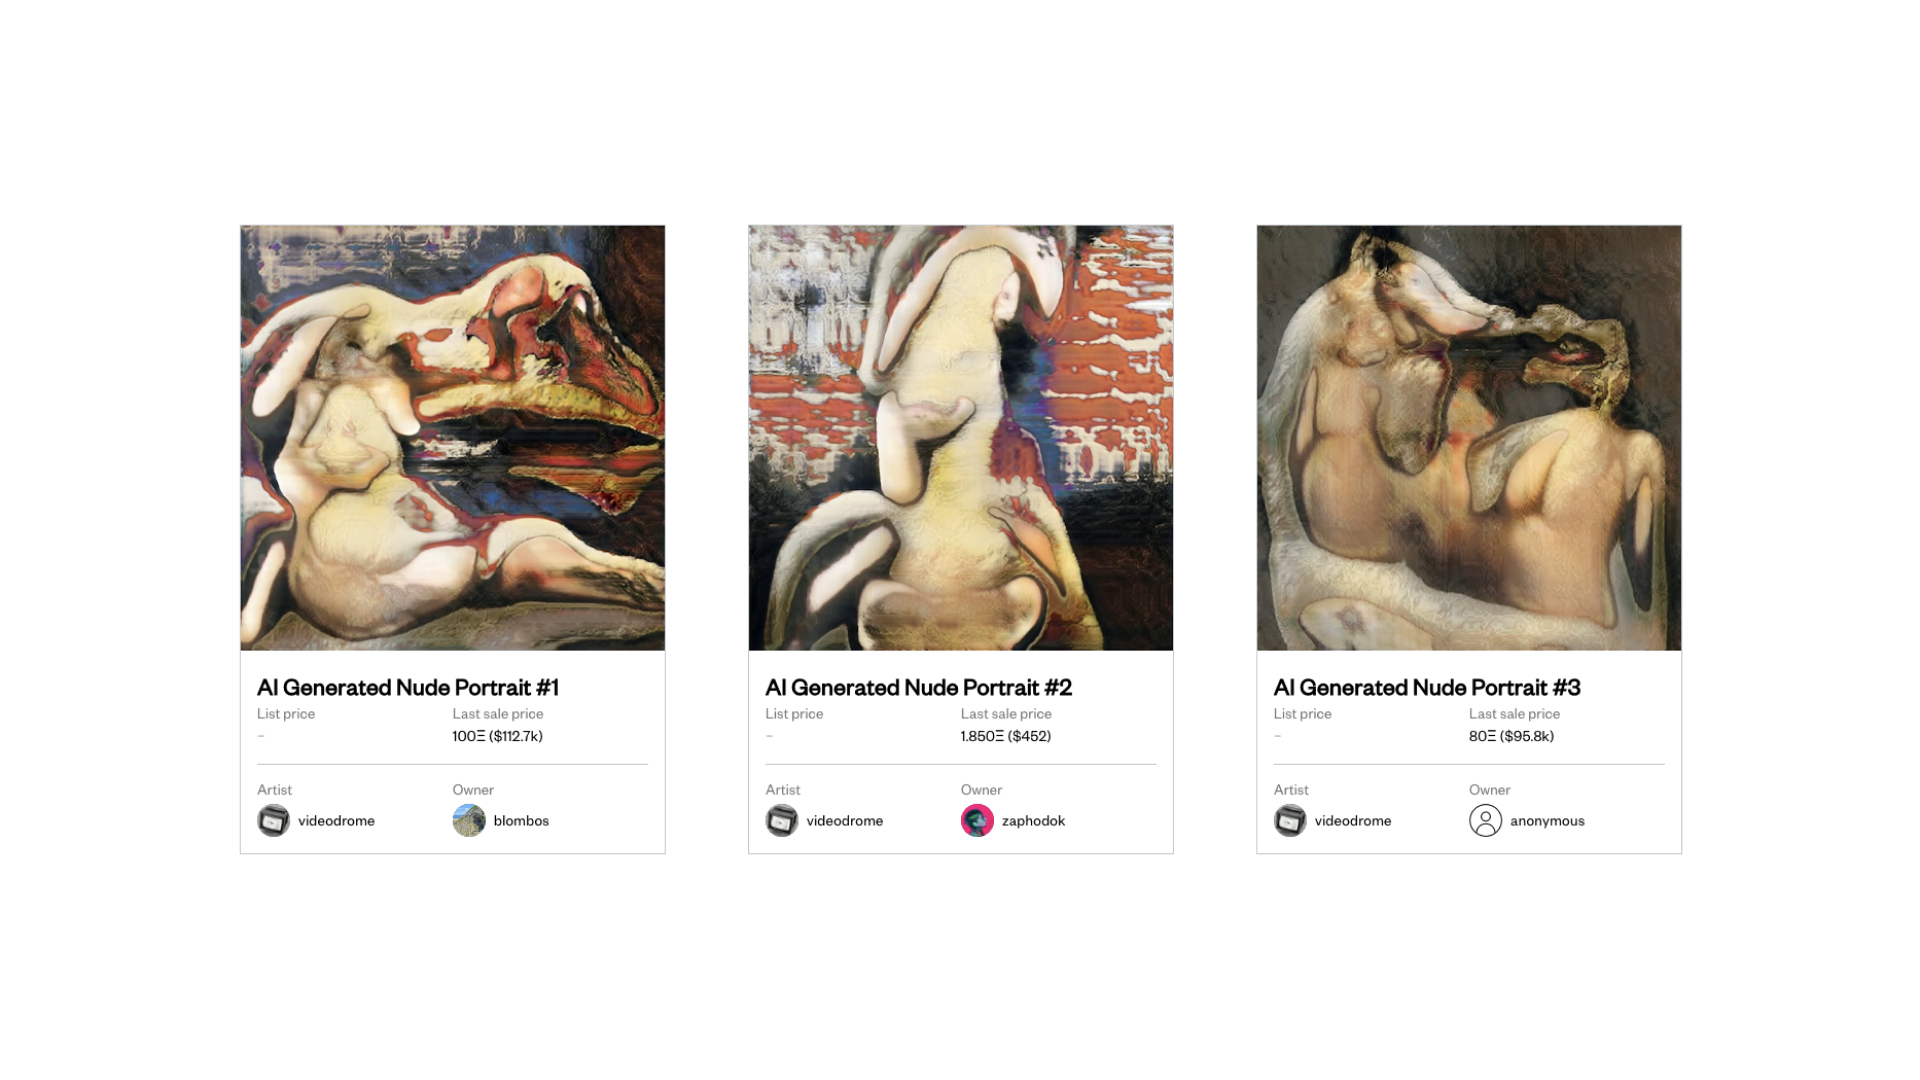 The first three AI Generated Nudes by Robbie Barrat (2018).